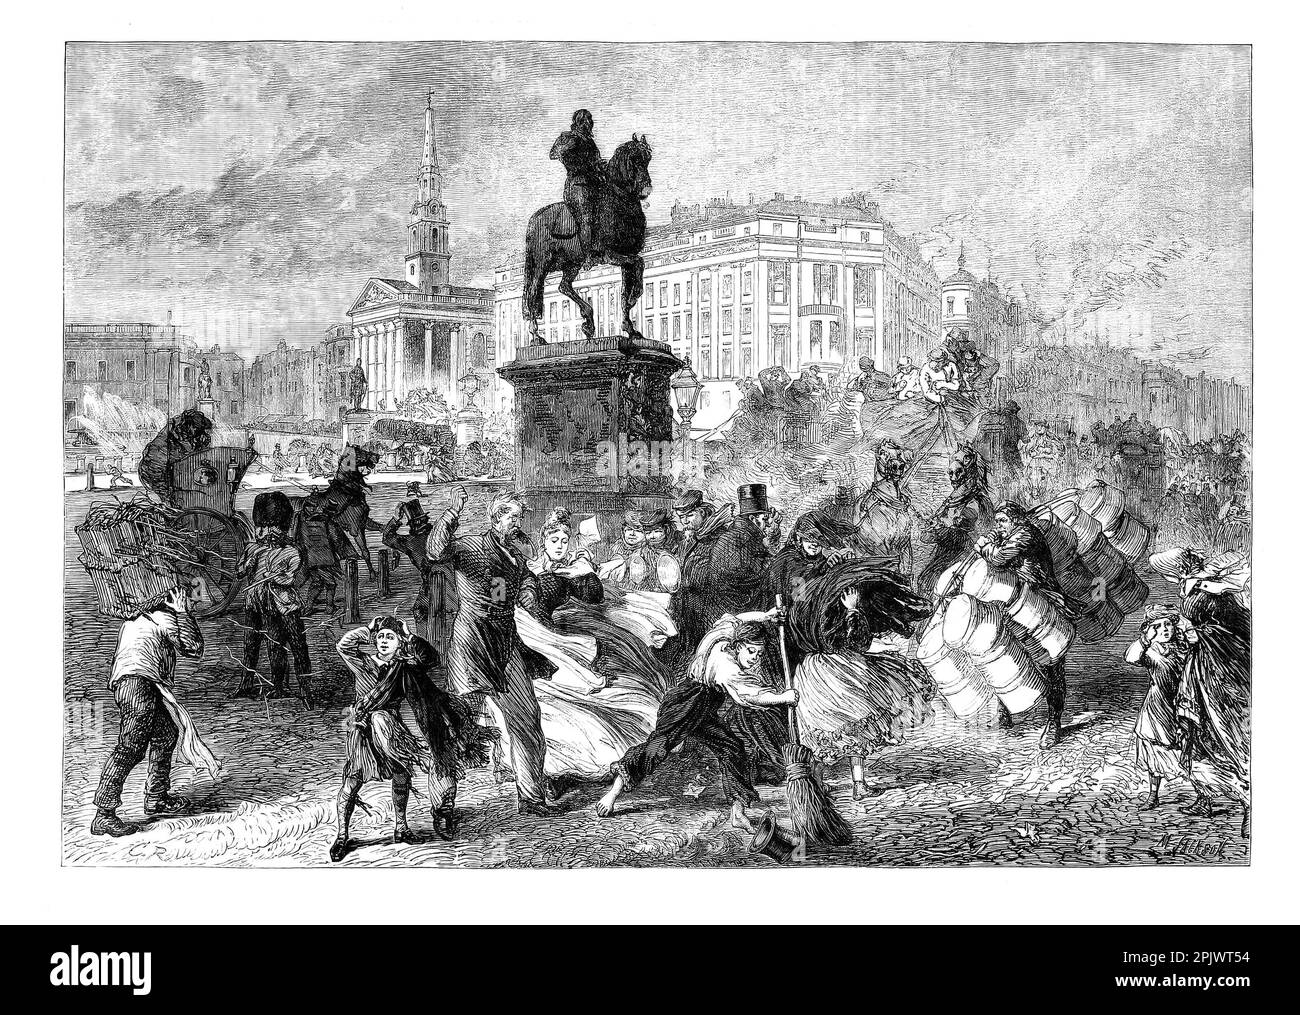 Strong March winds causing havoc in Trafalgar Square, London, England,  in 1865 Stock Photo